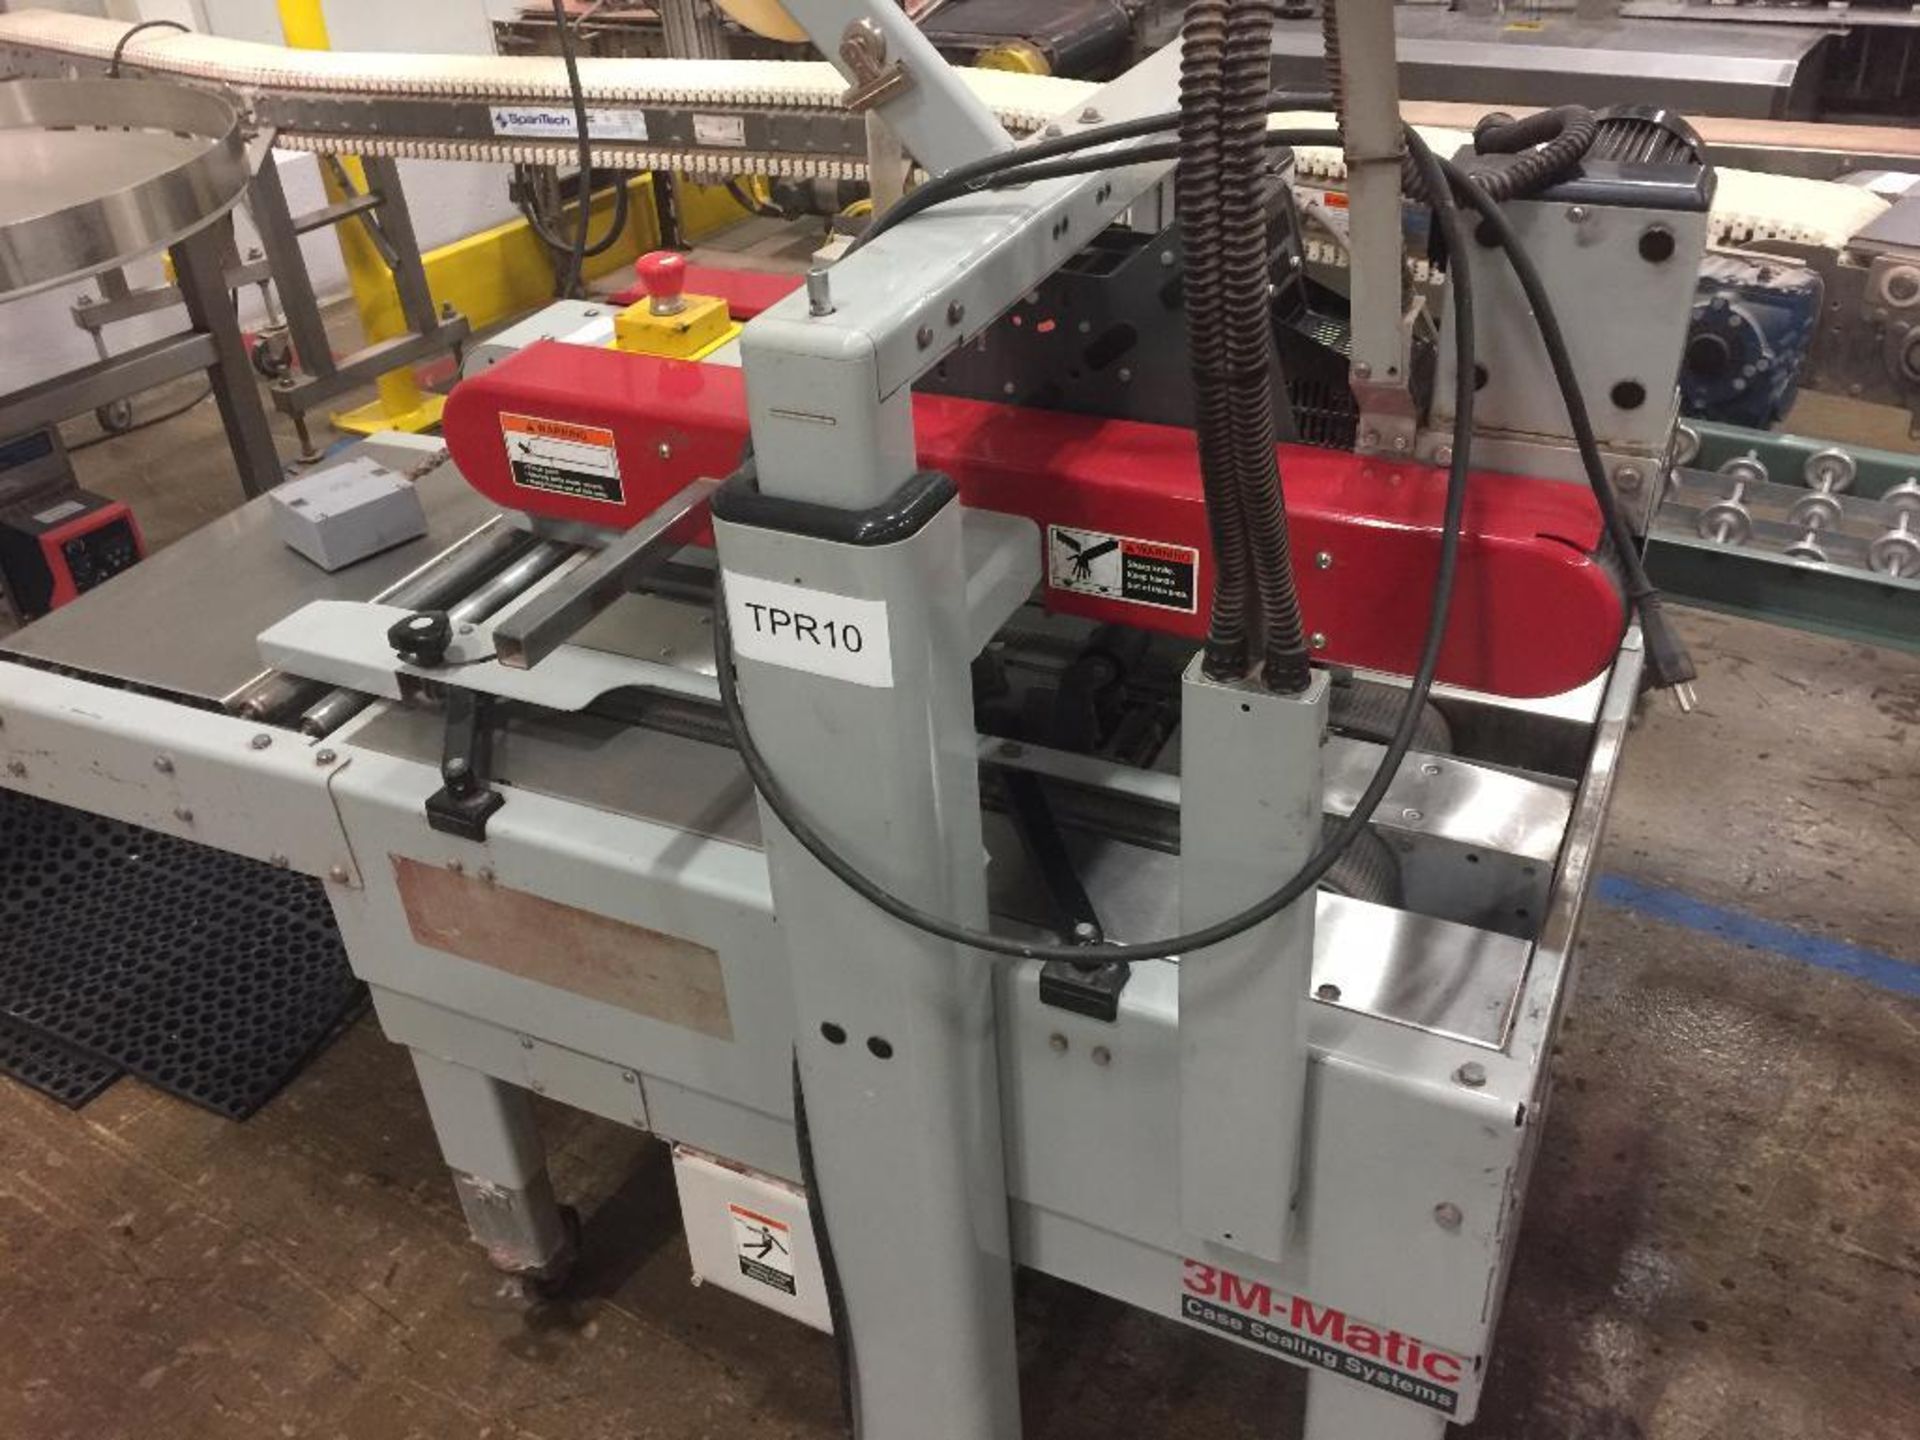 2010 3m-Matic 700A adjustable case sealer, type 40800, s/n 50257, top and bottom tape heads. (TPR10)